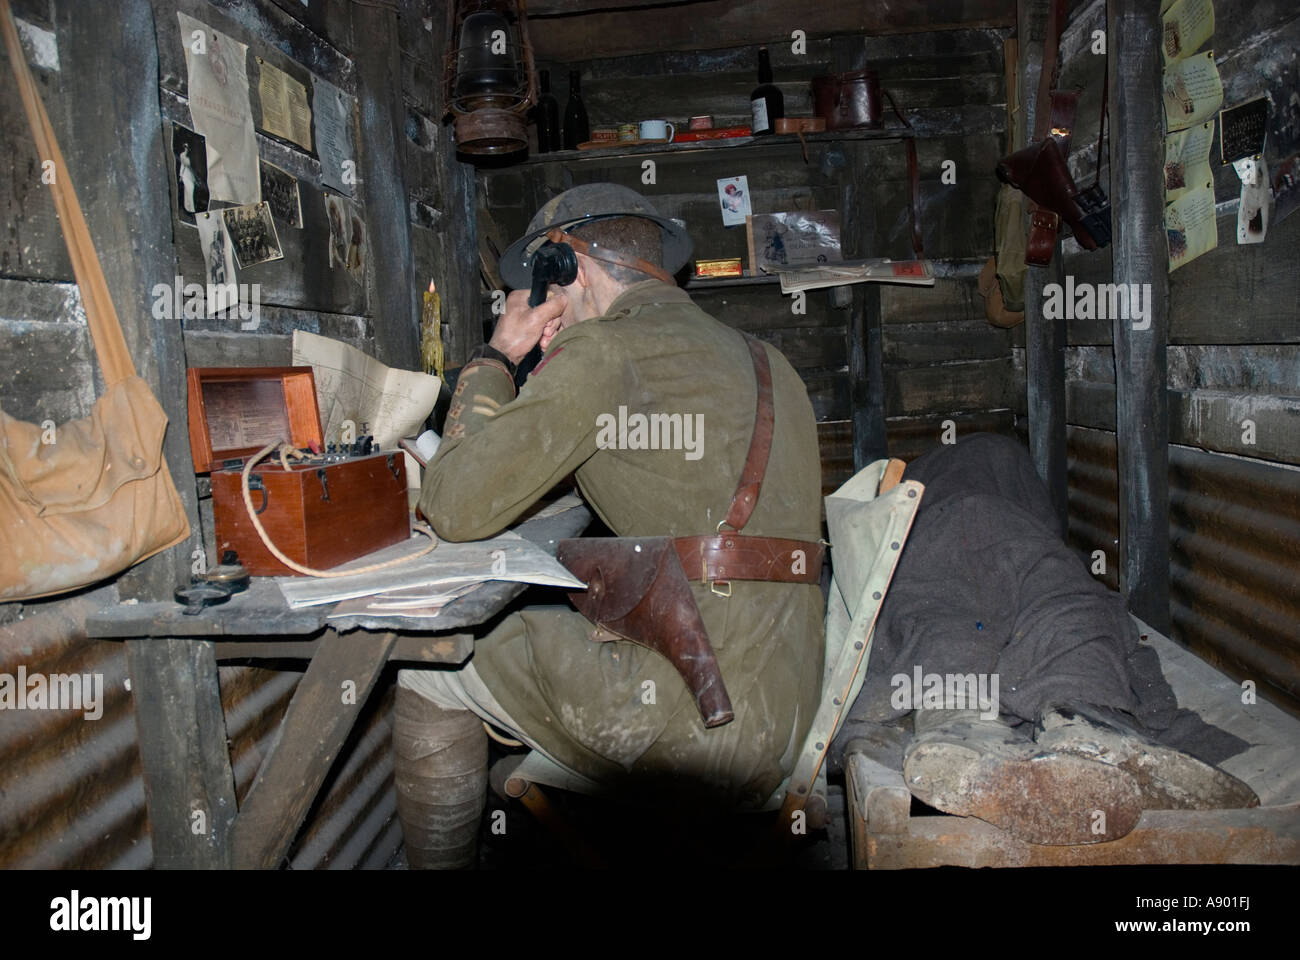 WW1 Command Post, life size model, Imperial War Museum, London. Stock Photo